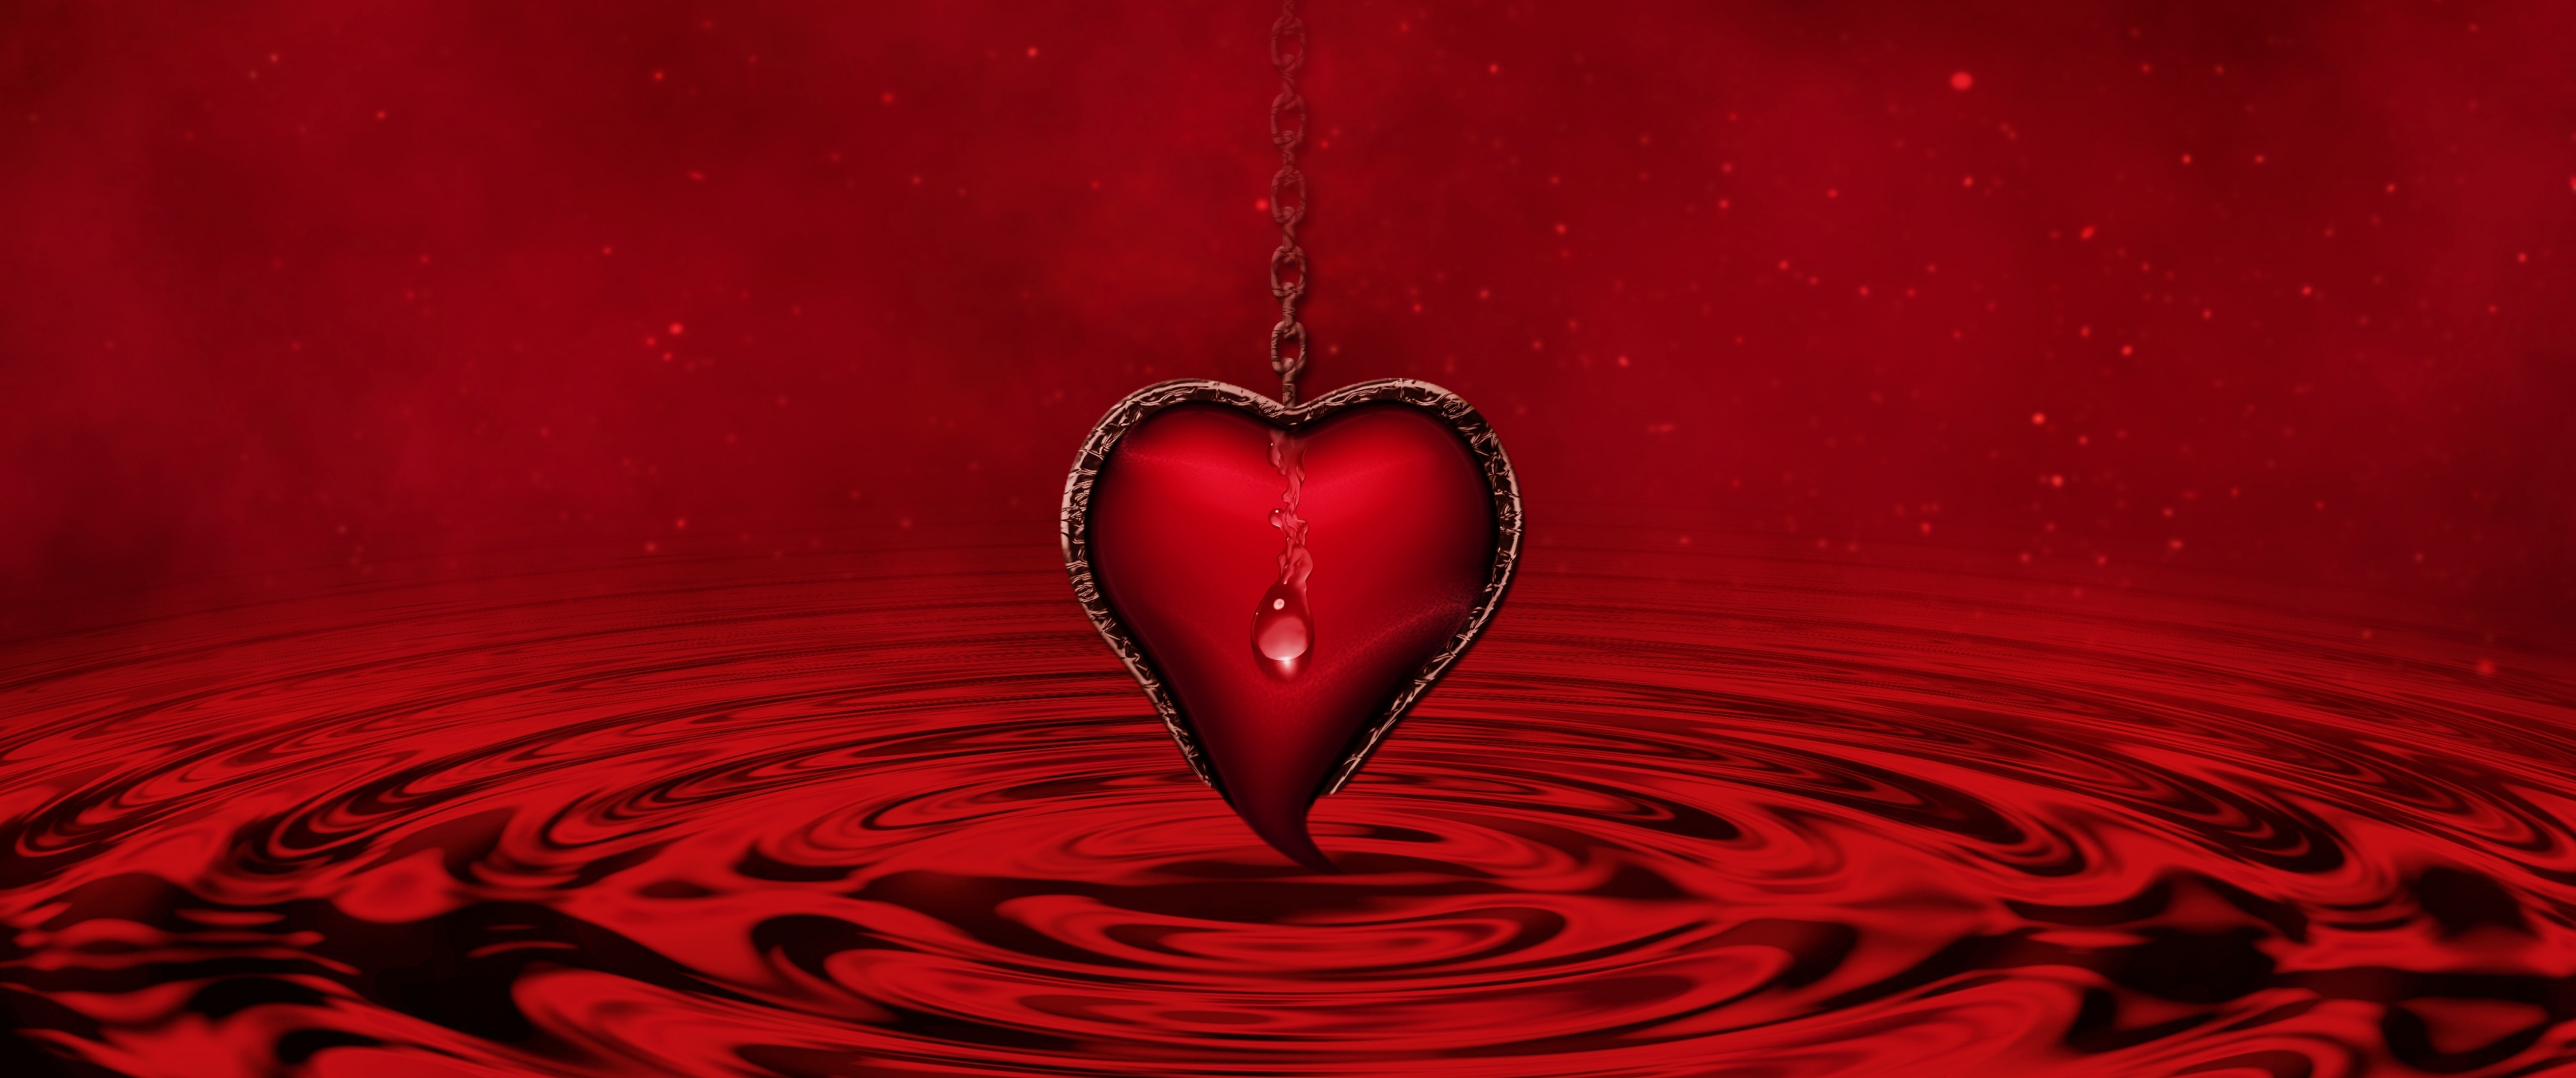 Red Heart In Black Background HD Red Aesthetic Wallpapers, HD Wallpapers